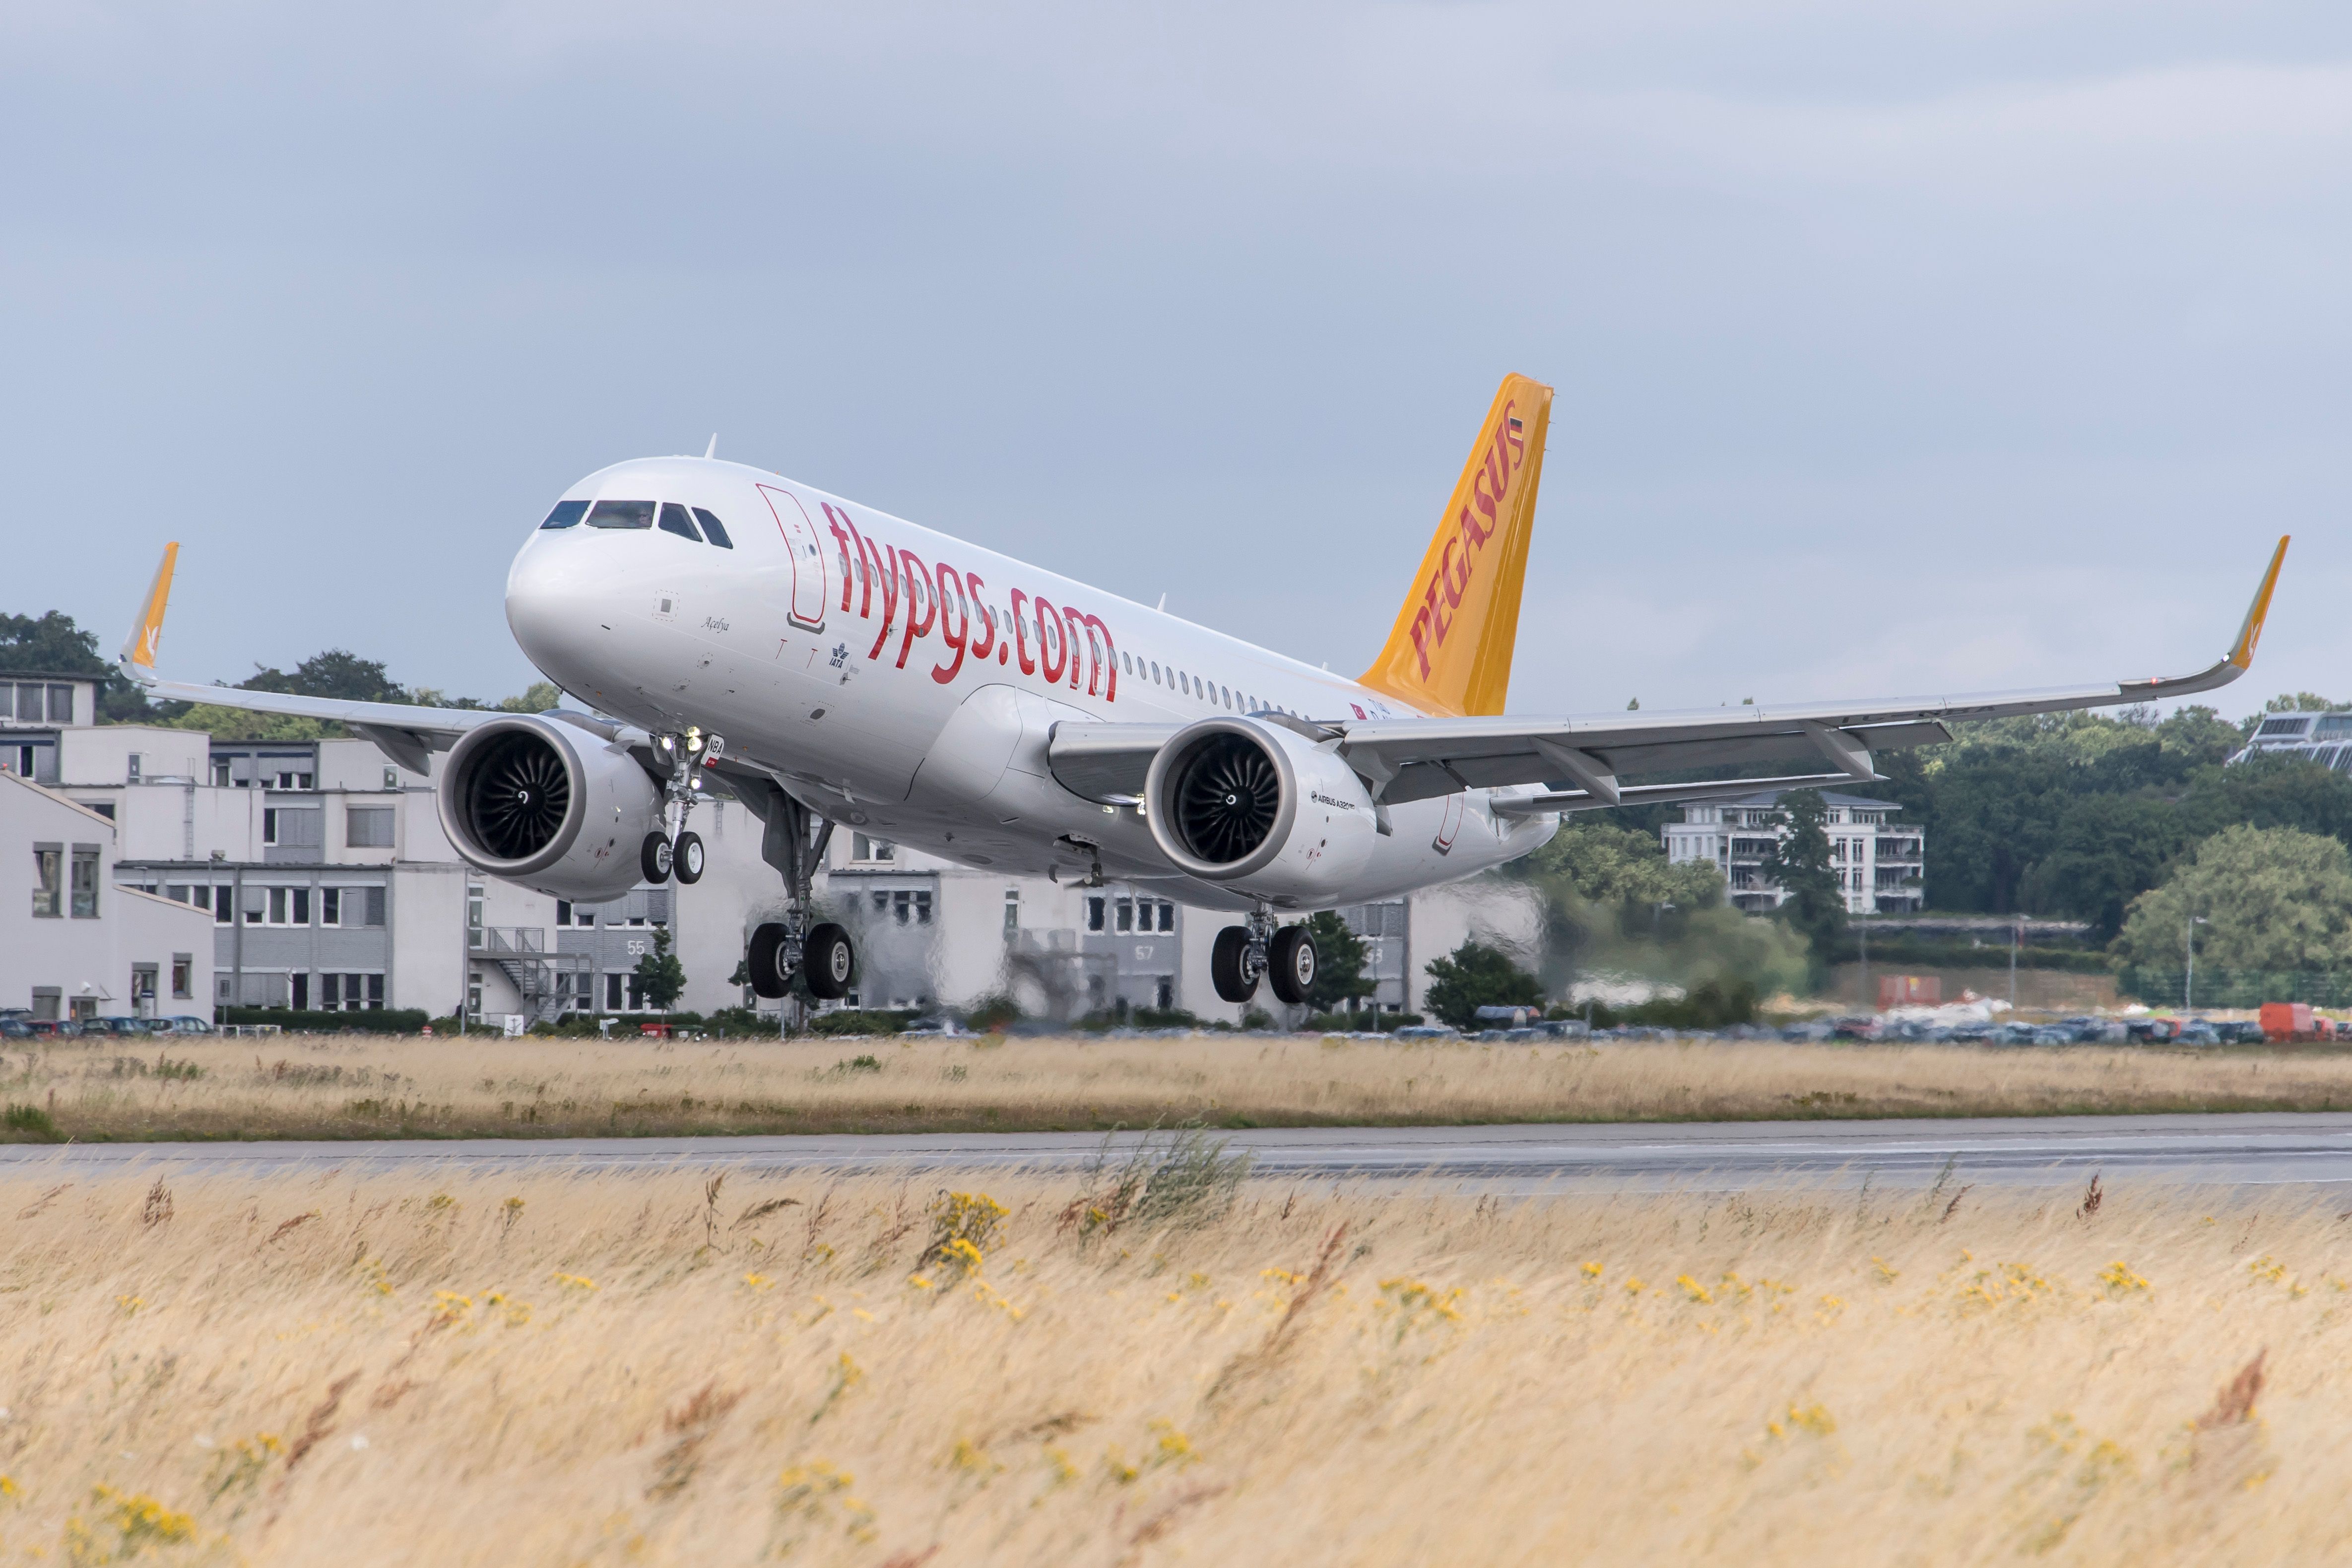 A Pegasus Airlines Airbus A320neo About to land.